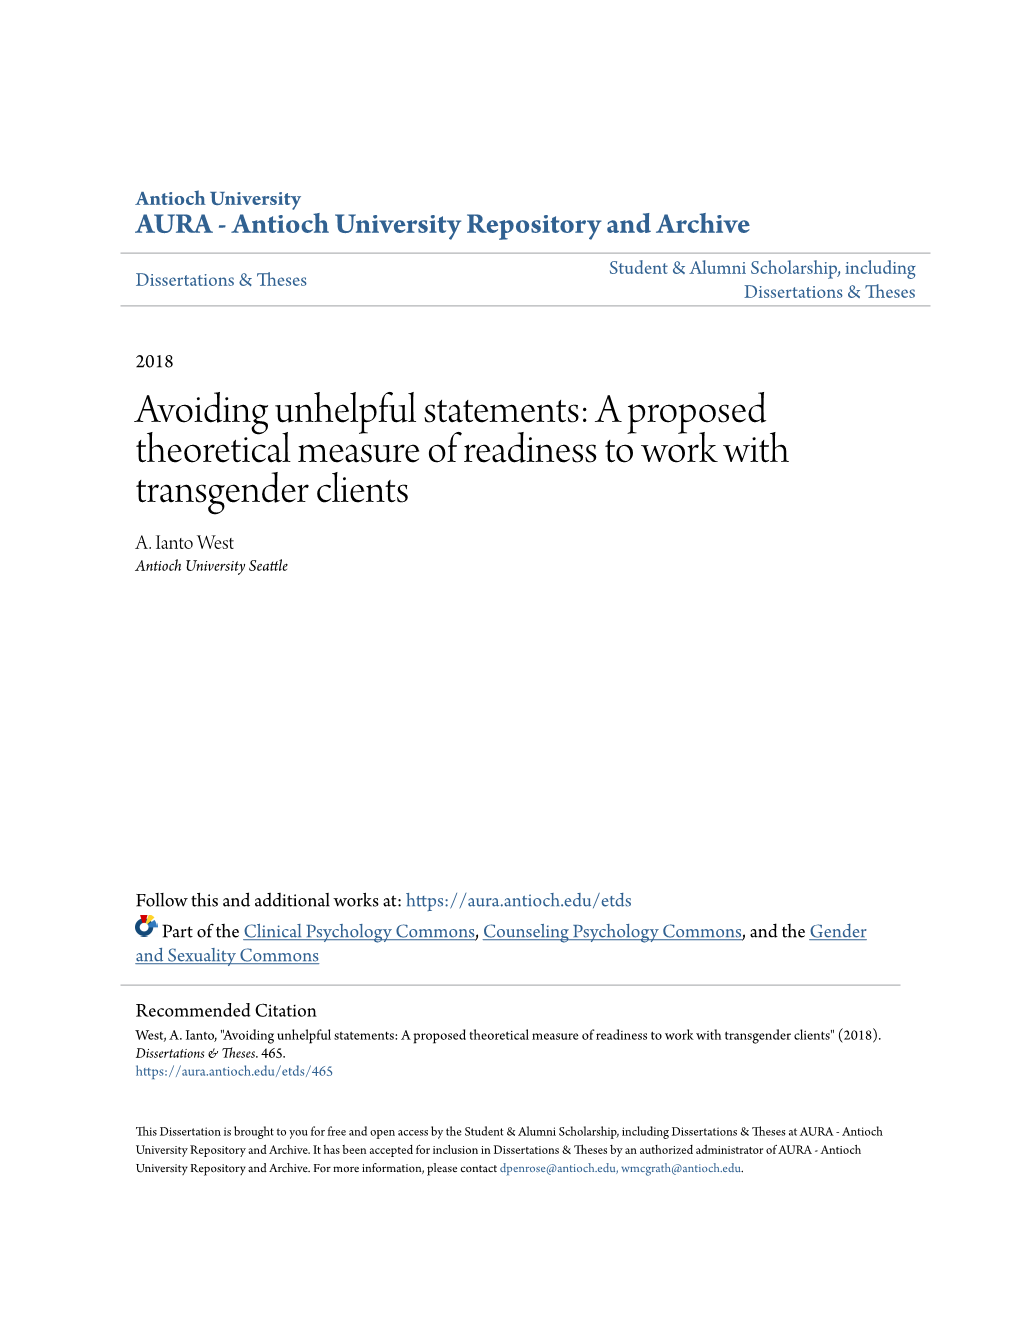 A Proposed Theoretical Measure of Readiness to Work with Transgender Clients A